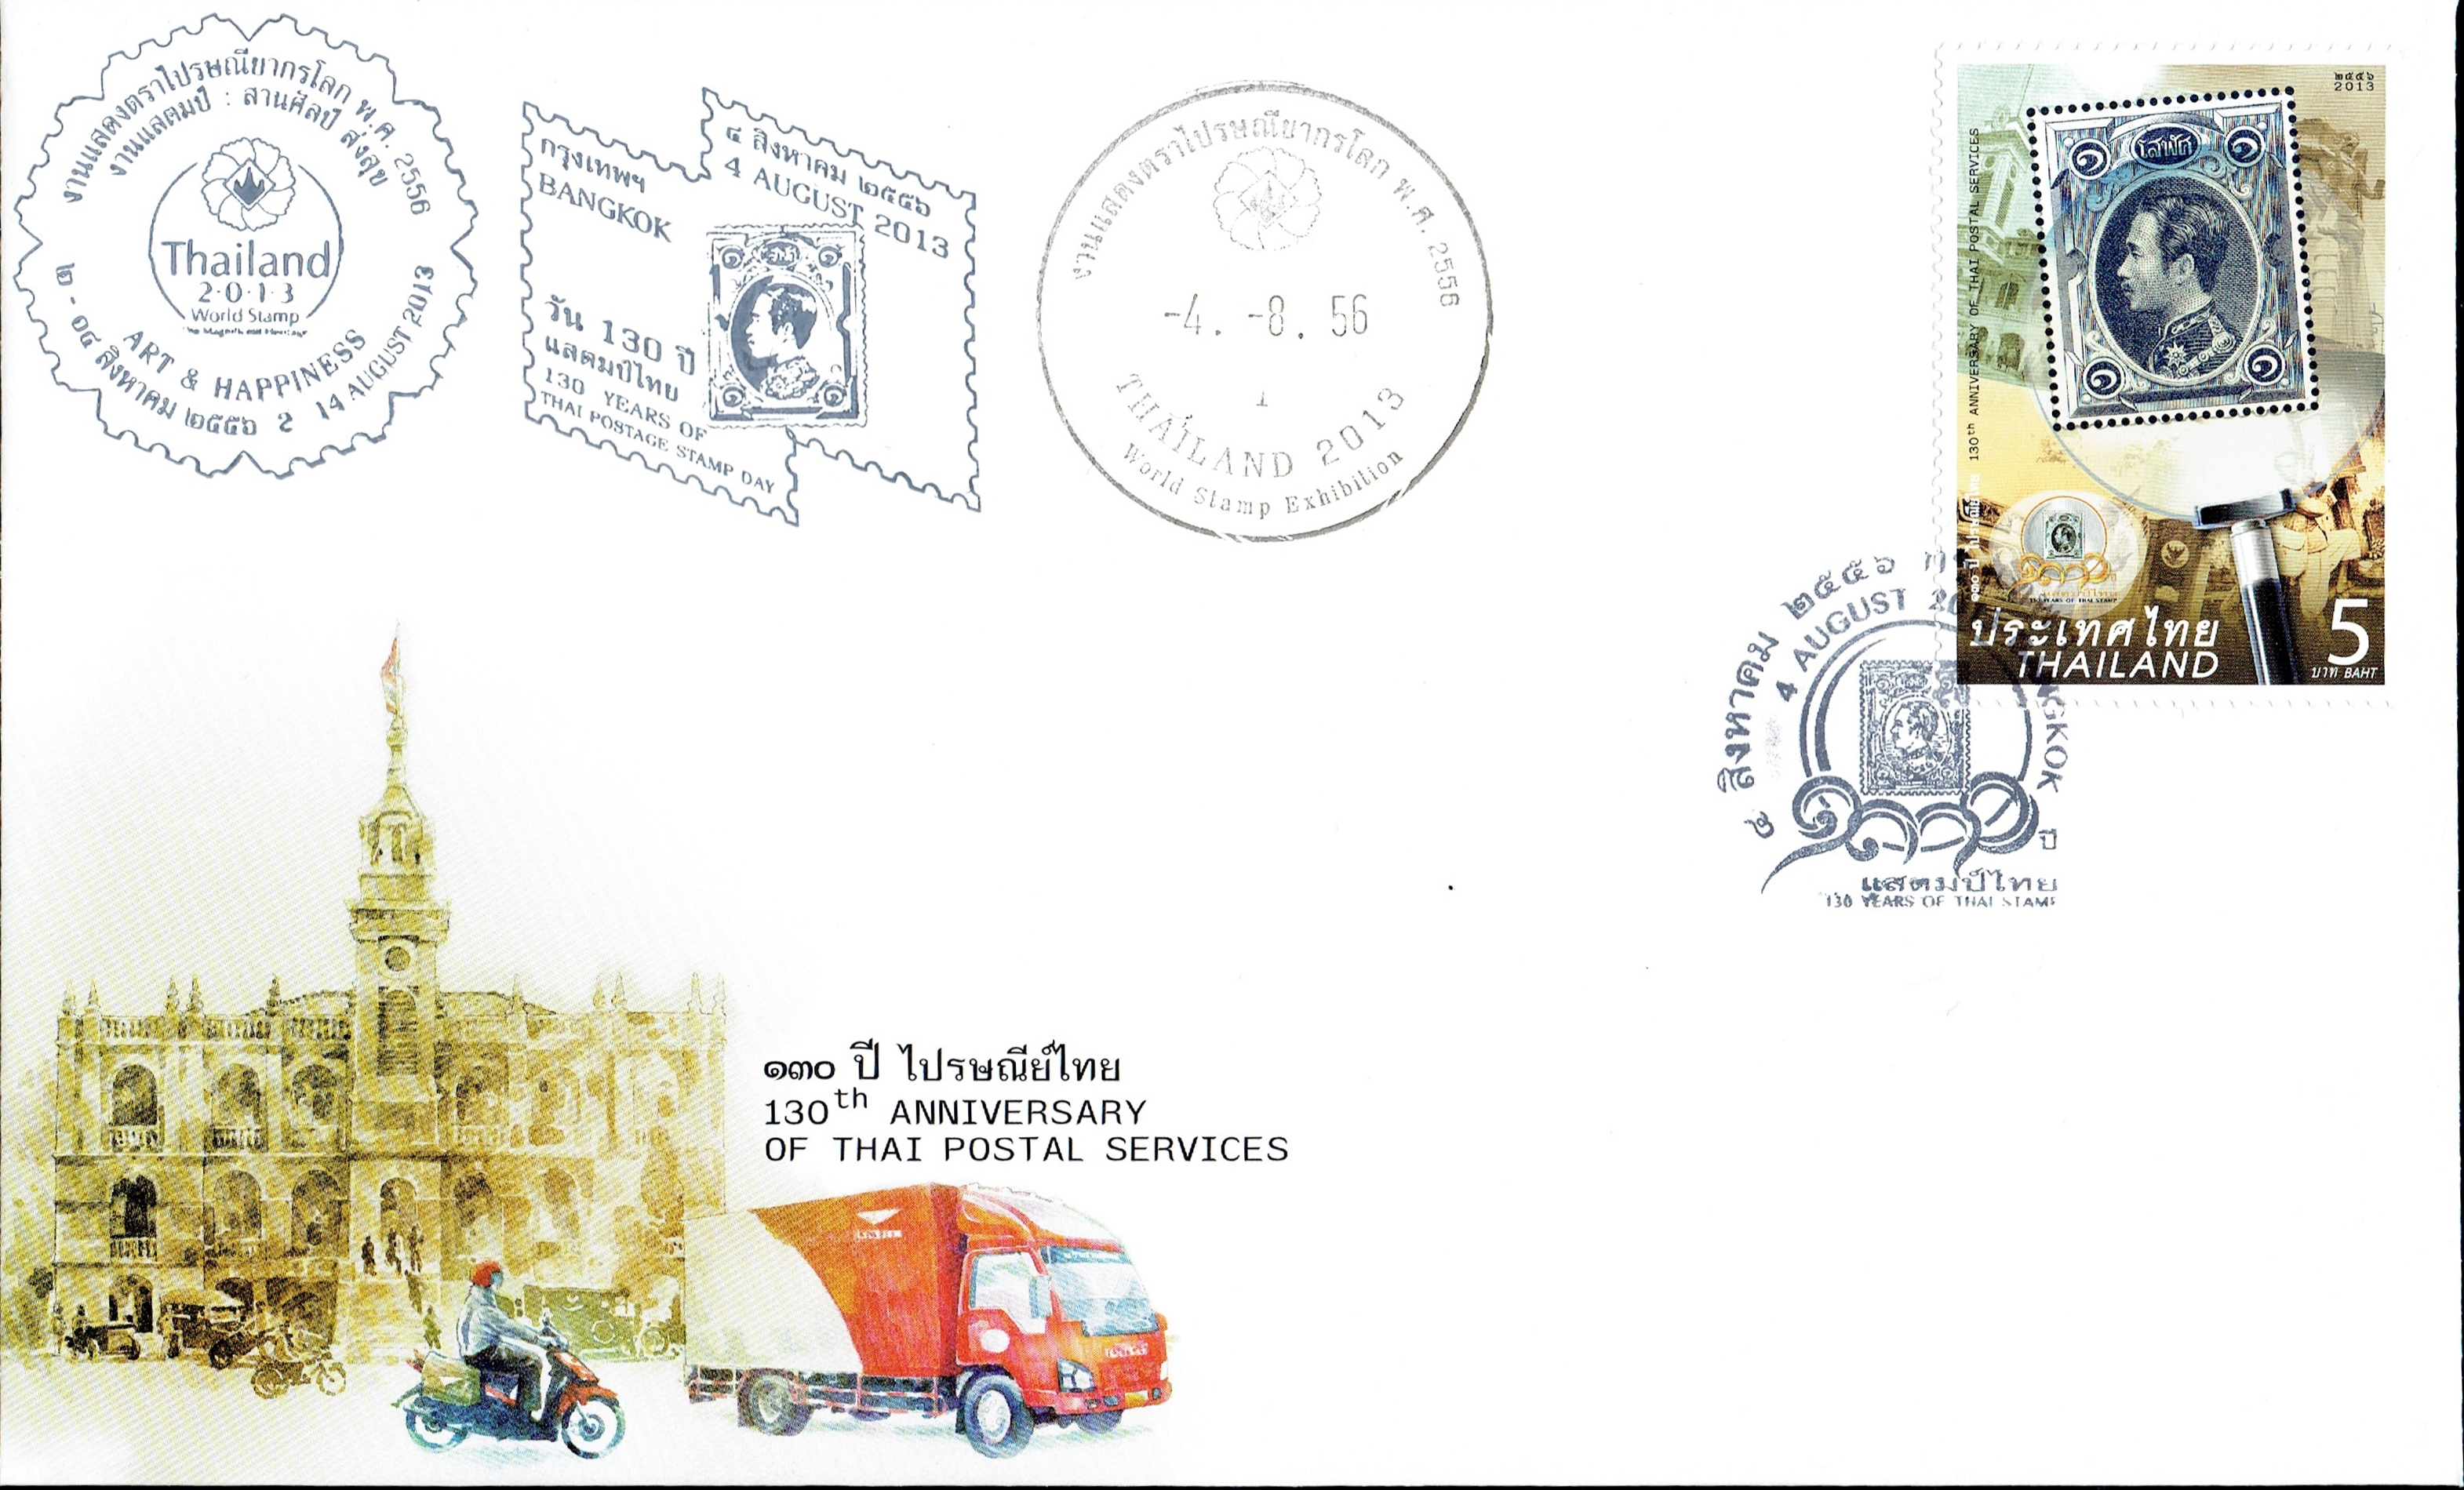 Thailand - Michel #3325 (2013) first day cover with THAILAND 2013 World Stamp Exhibition cancellations